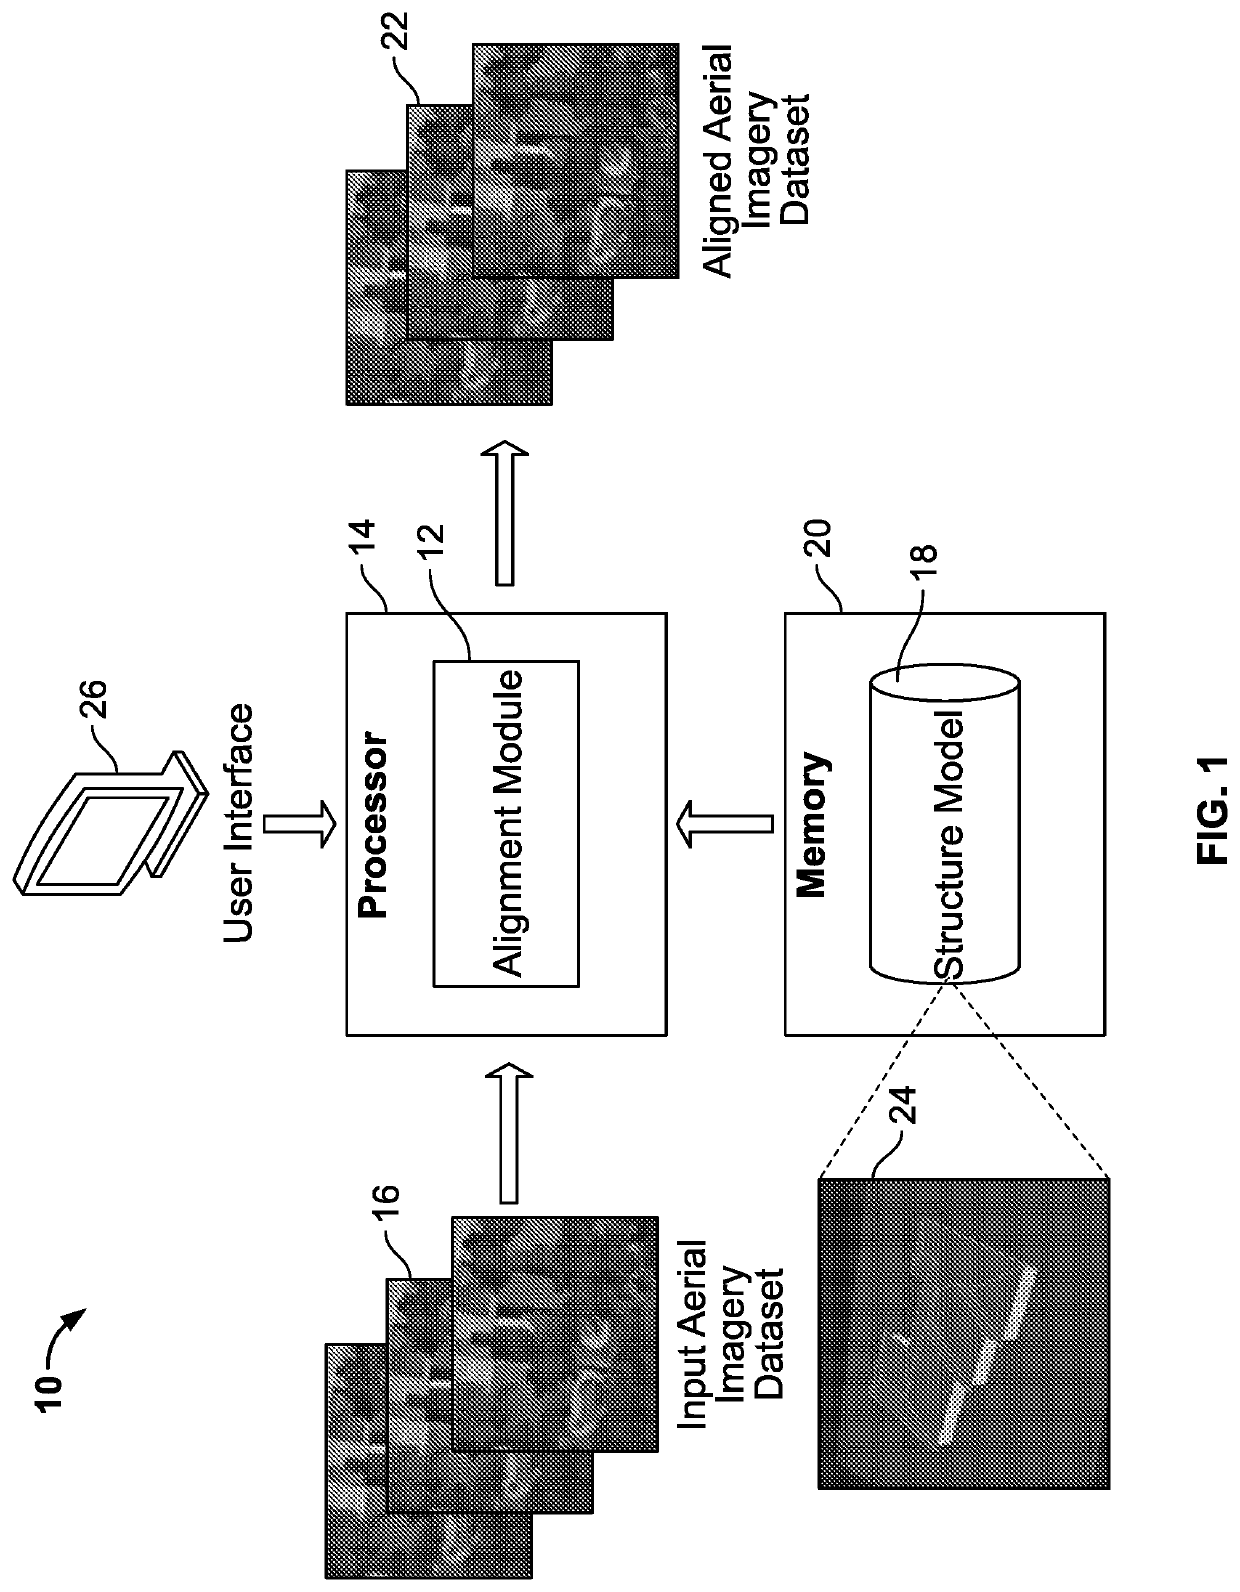 Systems and methods for rapid alignment of digital imagery datasets to models of structures